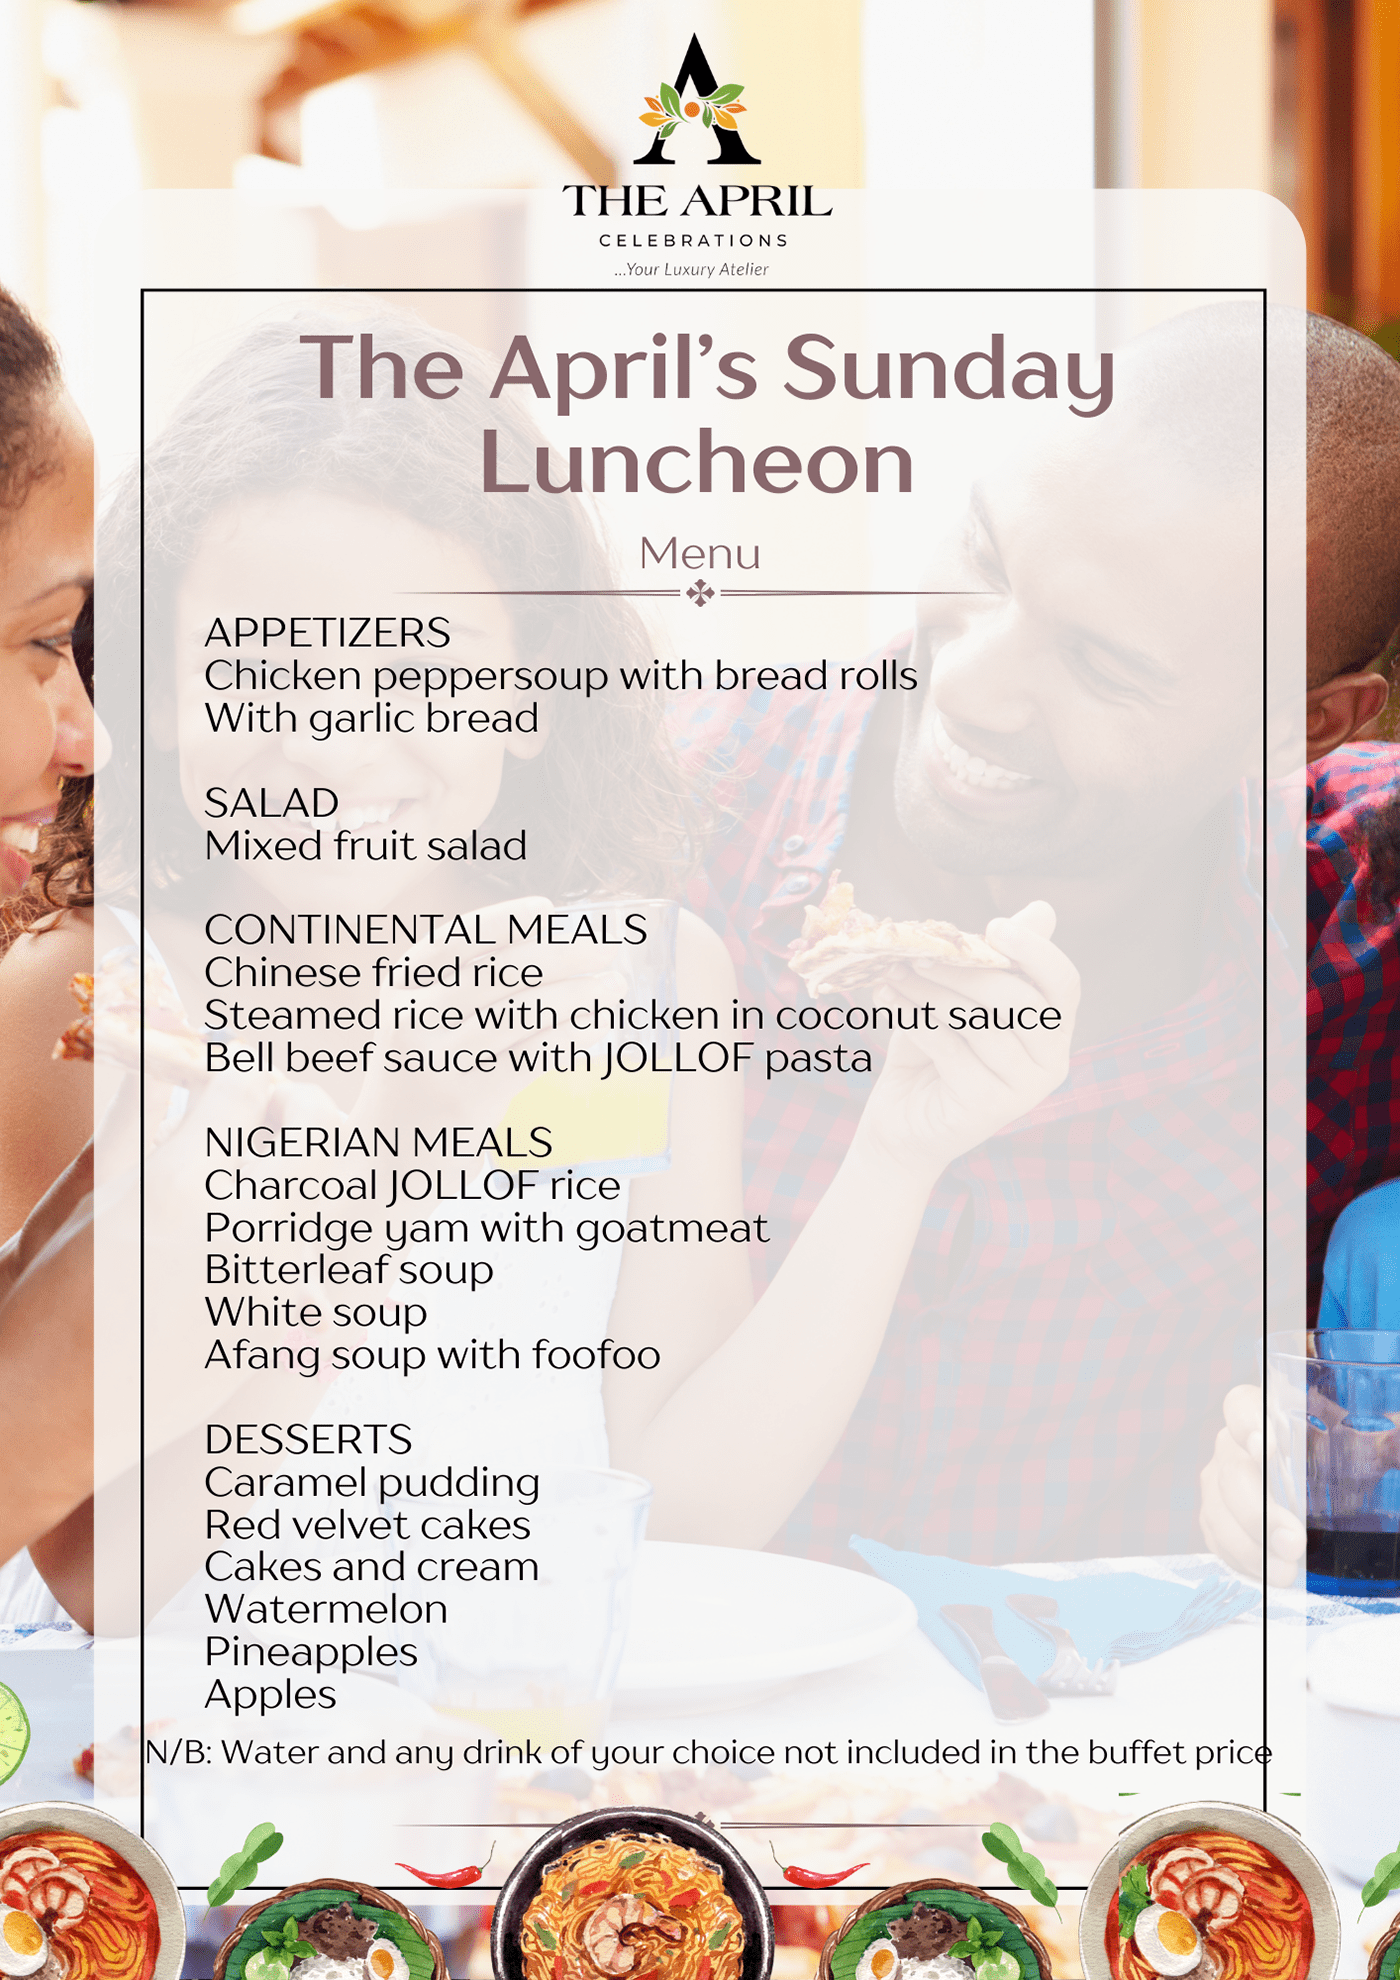 The April Sunday Luncheon